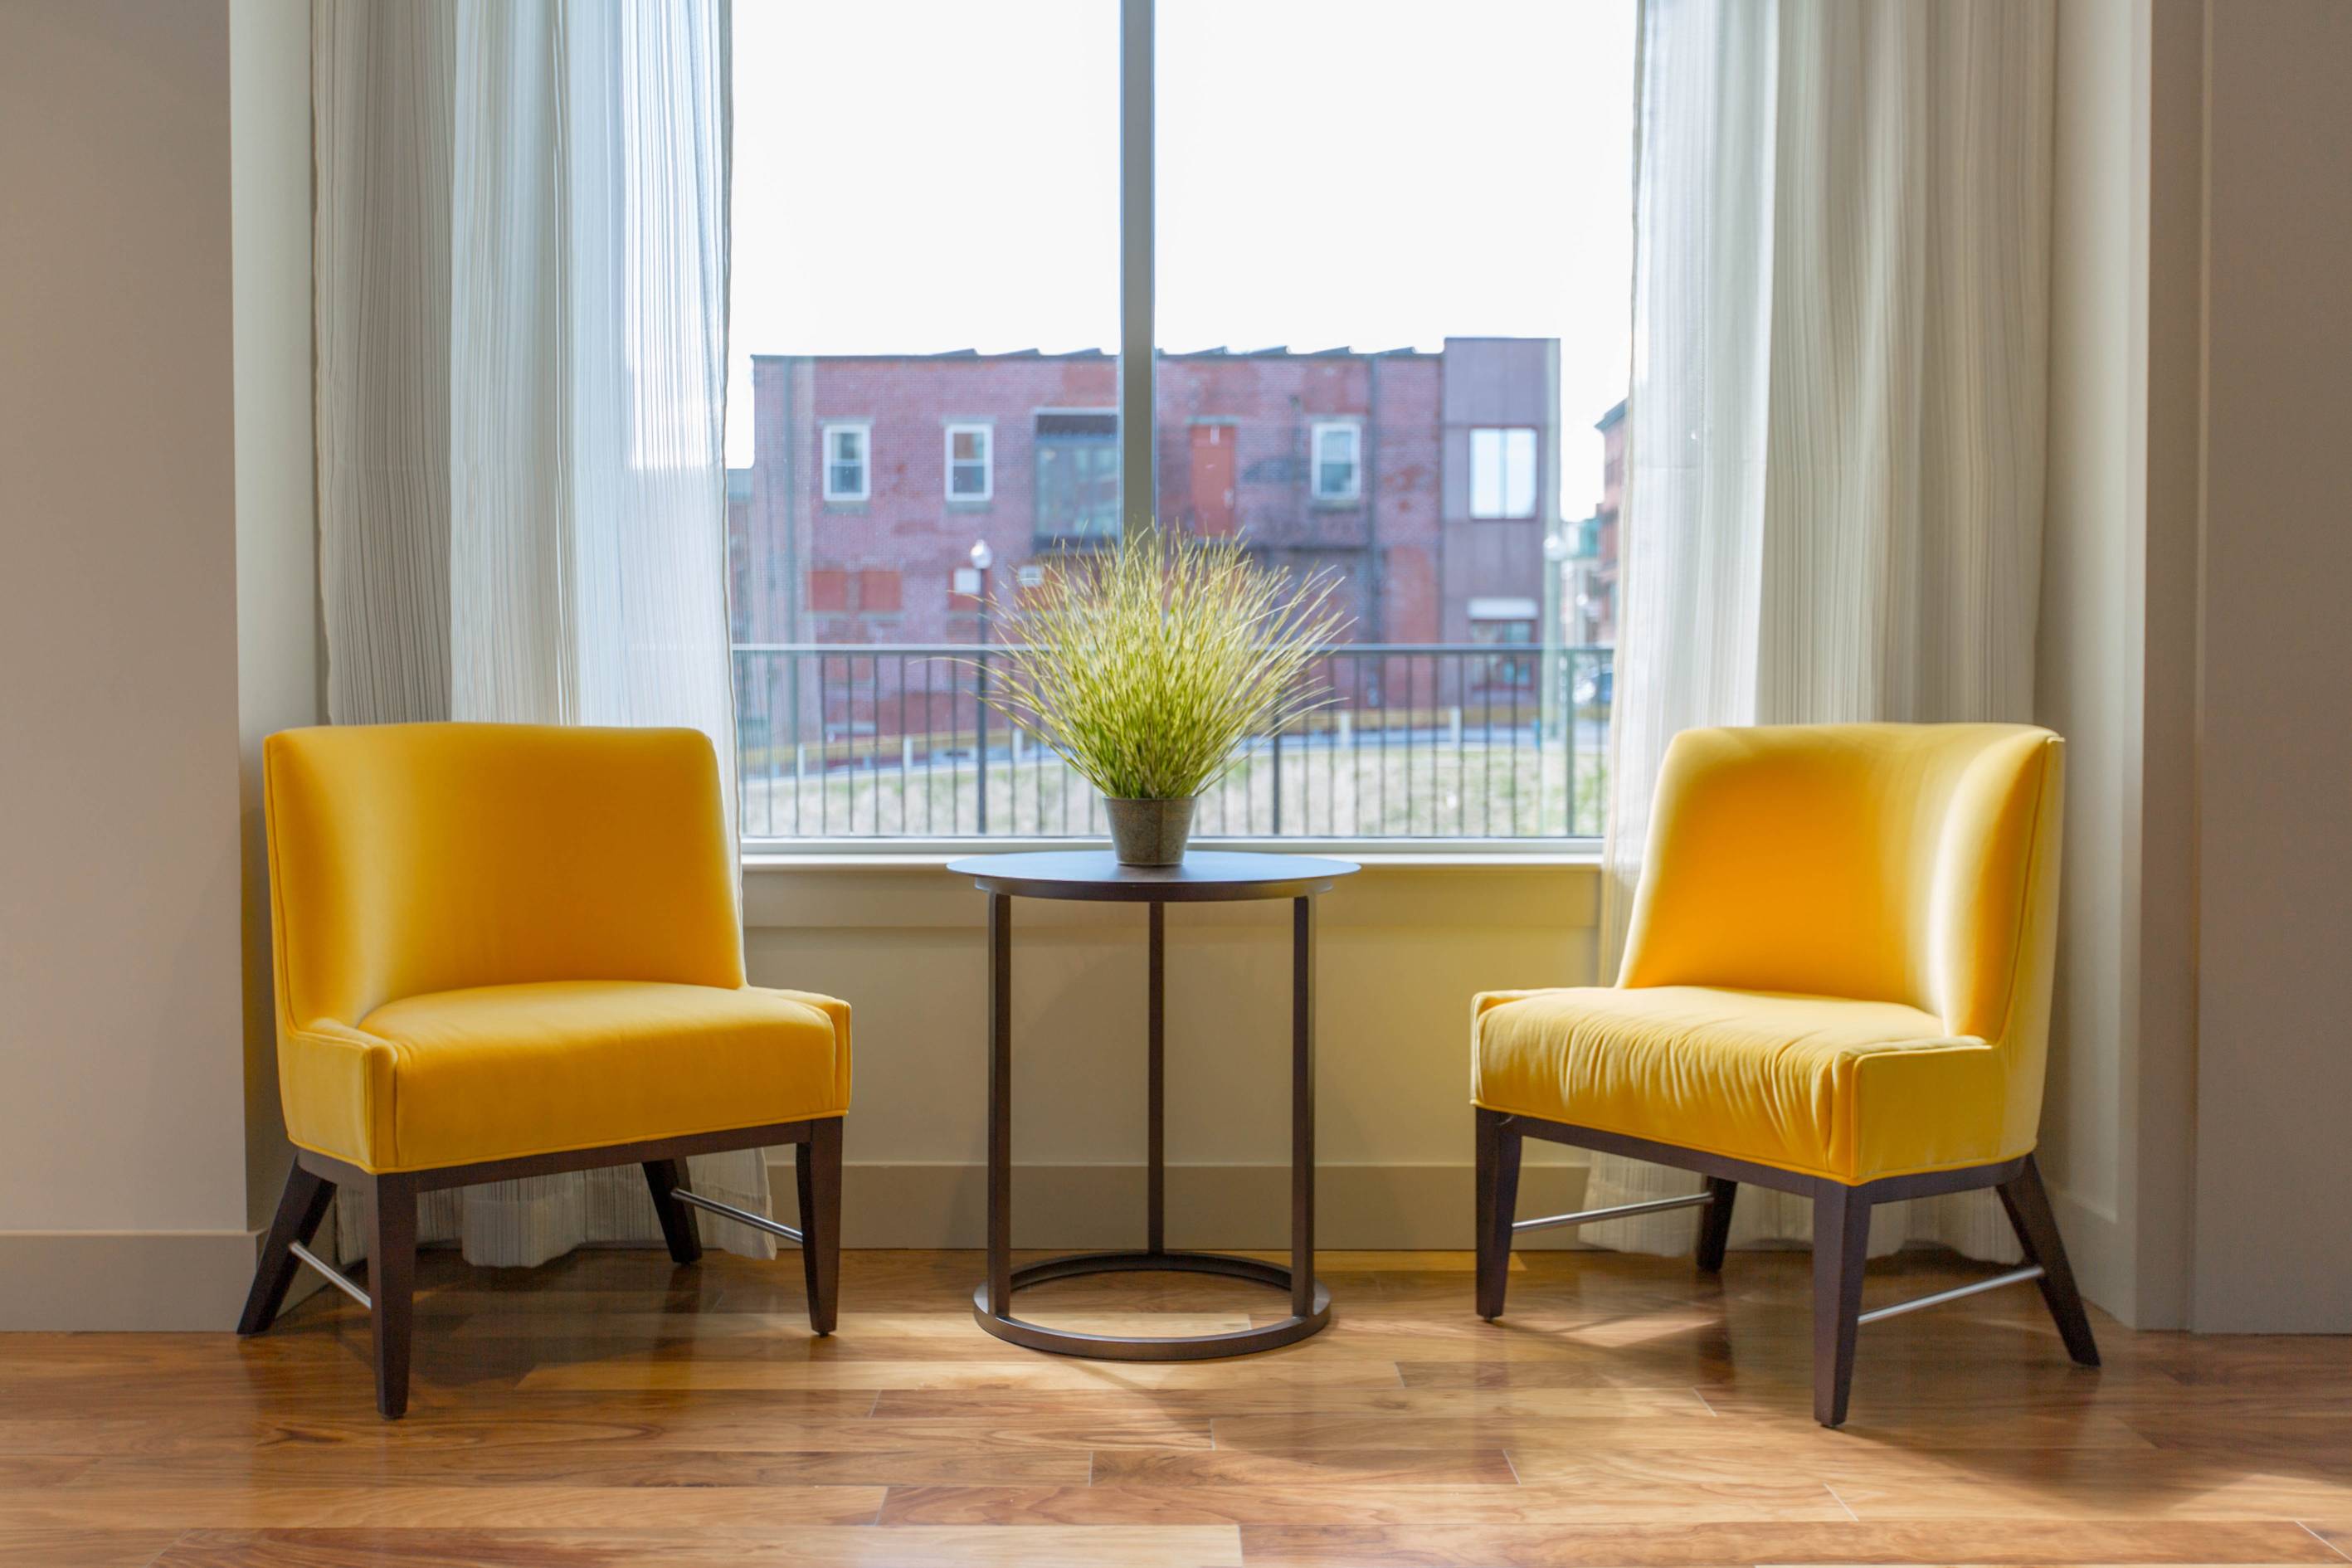 Two yellow chairs in front of window